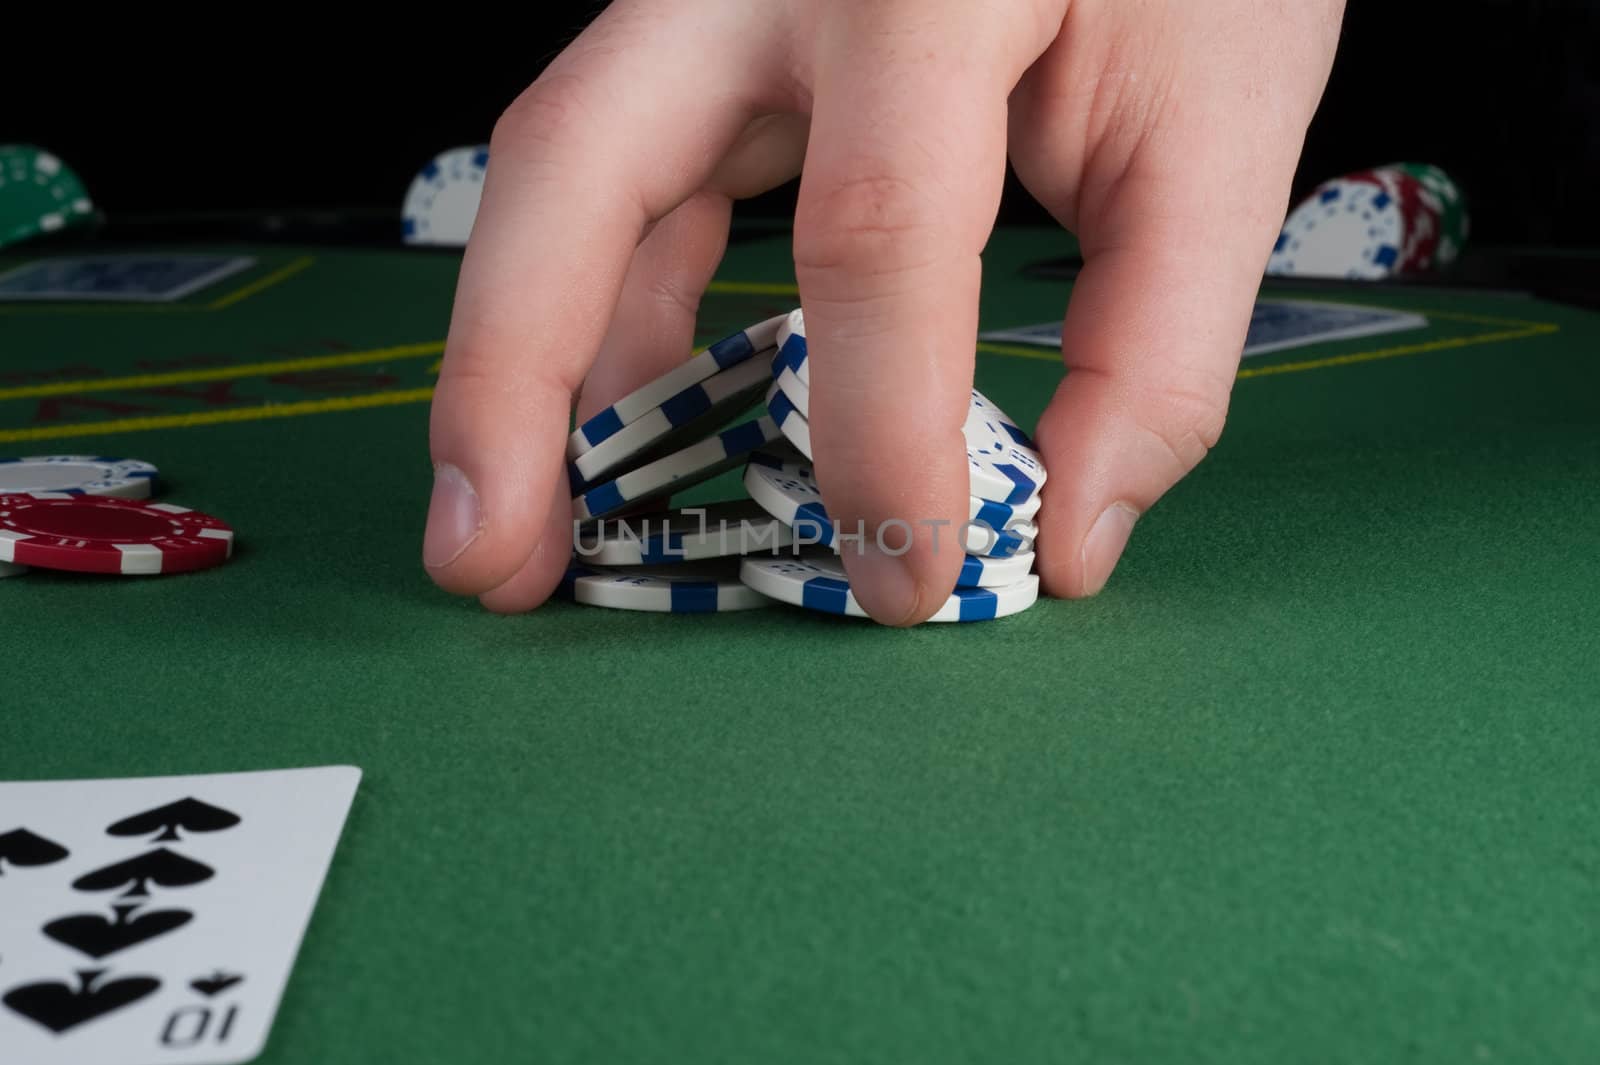 Poker chip trick combining two stacks of chips